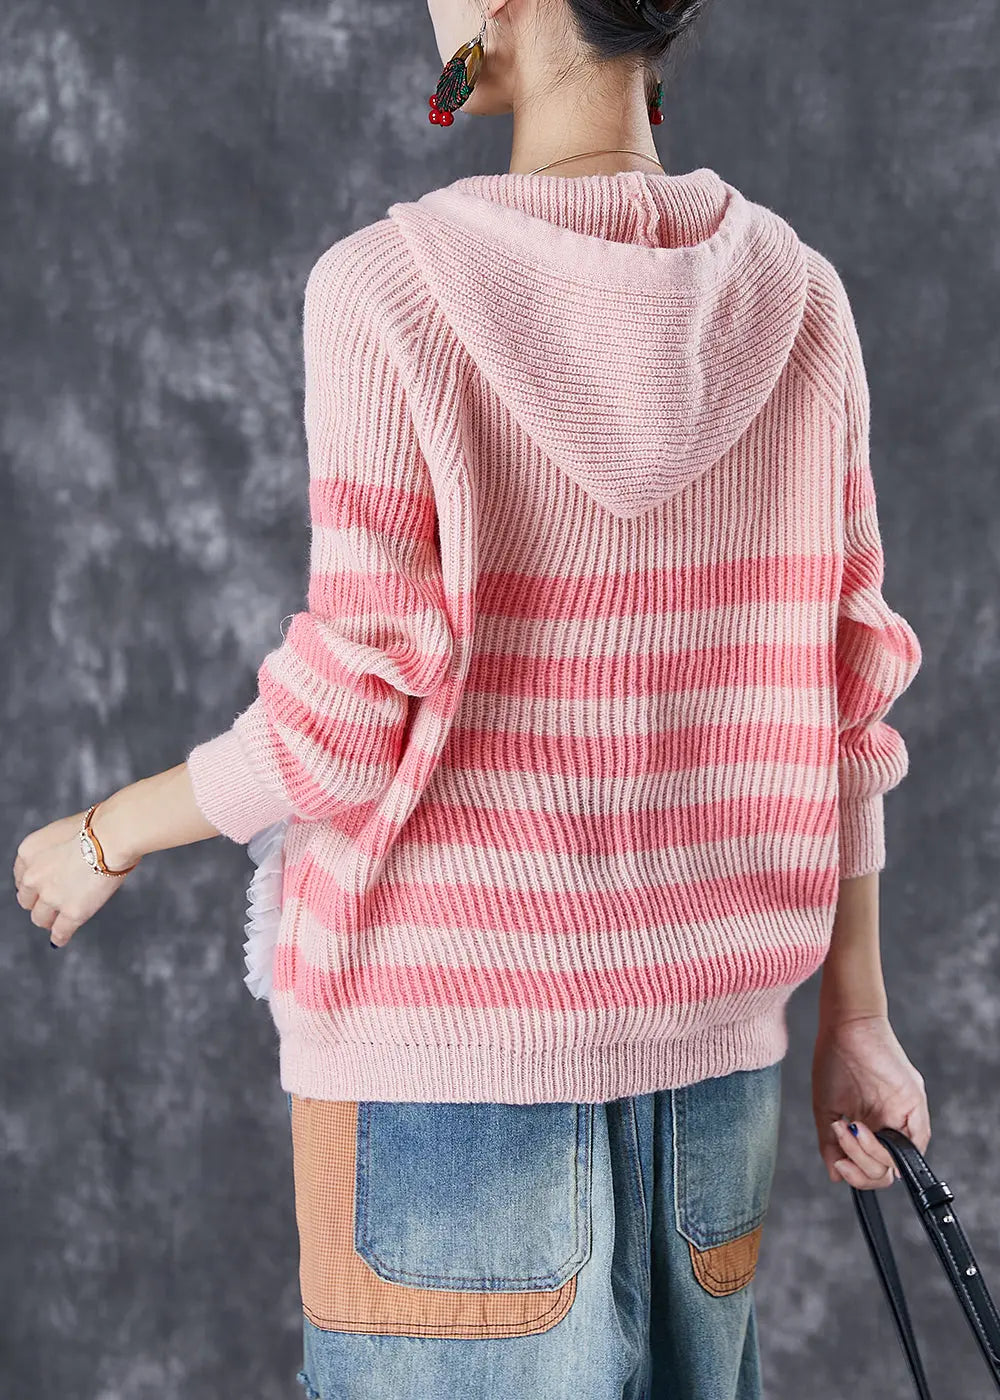 Casual Pink Animal Embroideried Patchwork Knit Pullover Tops Fall Ada Fashion